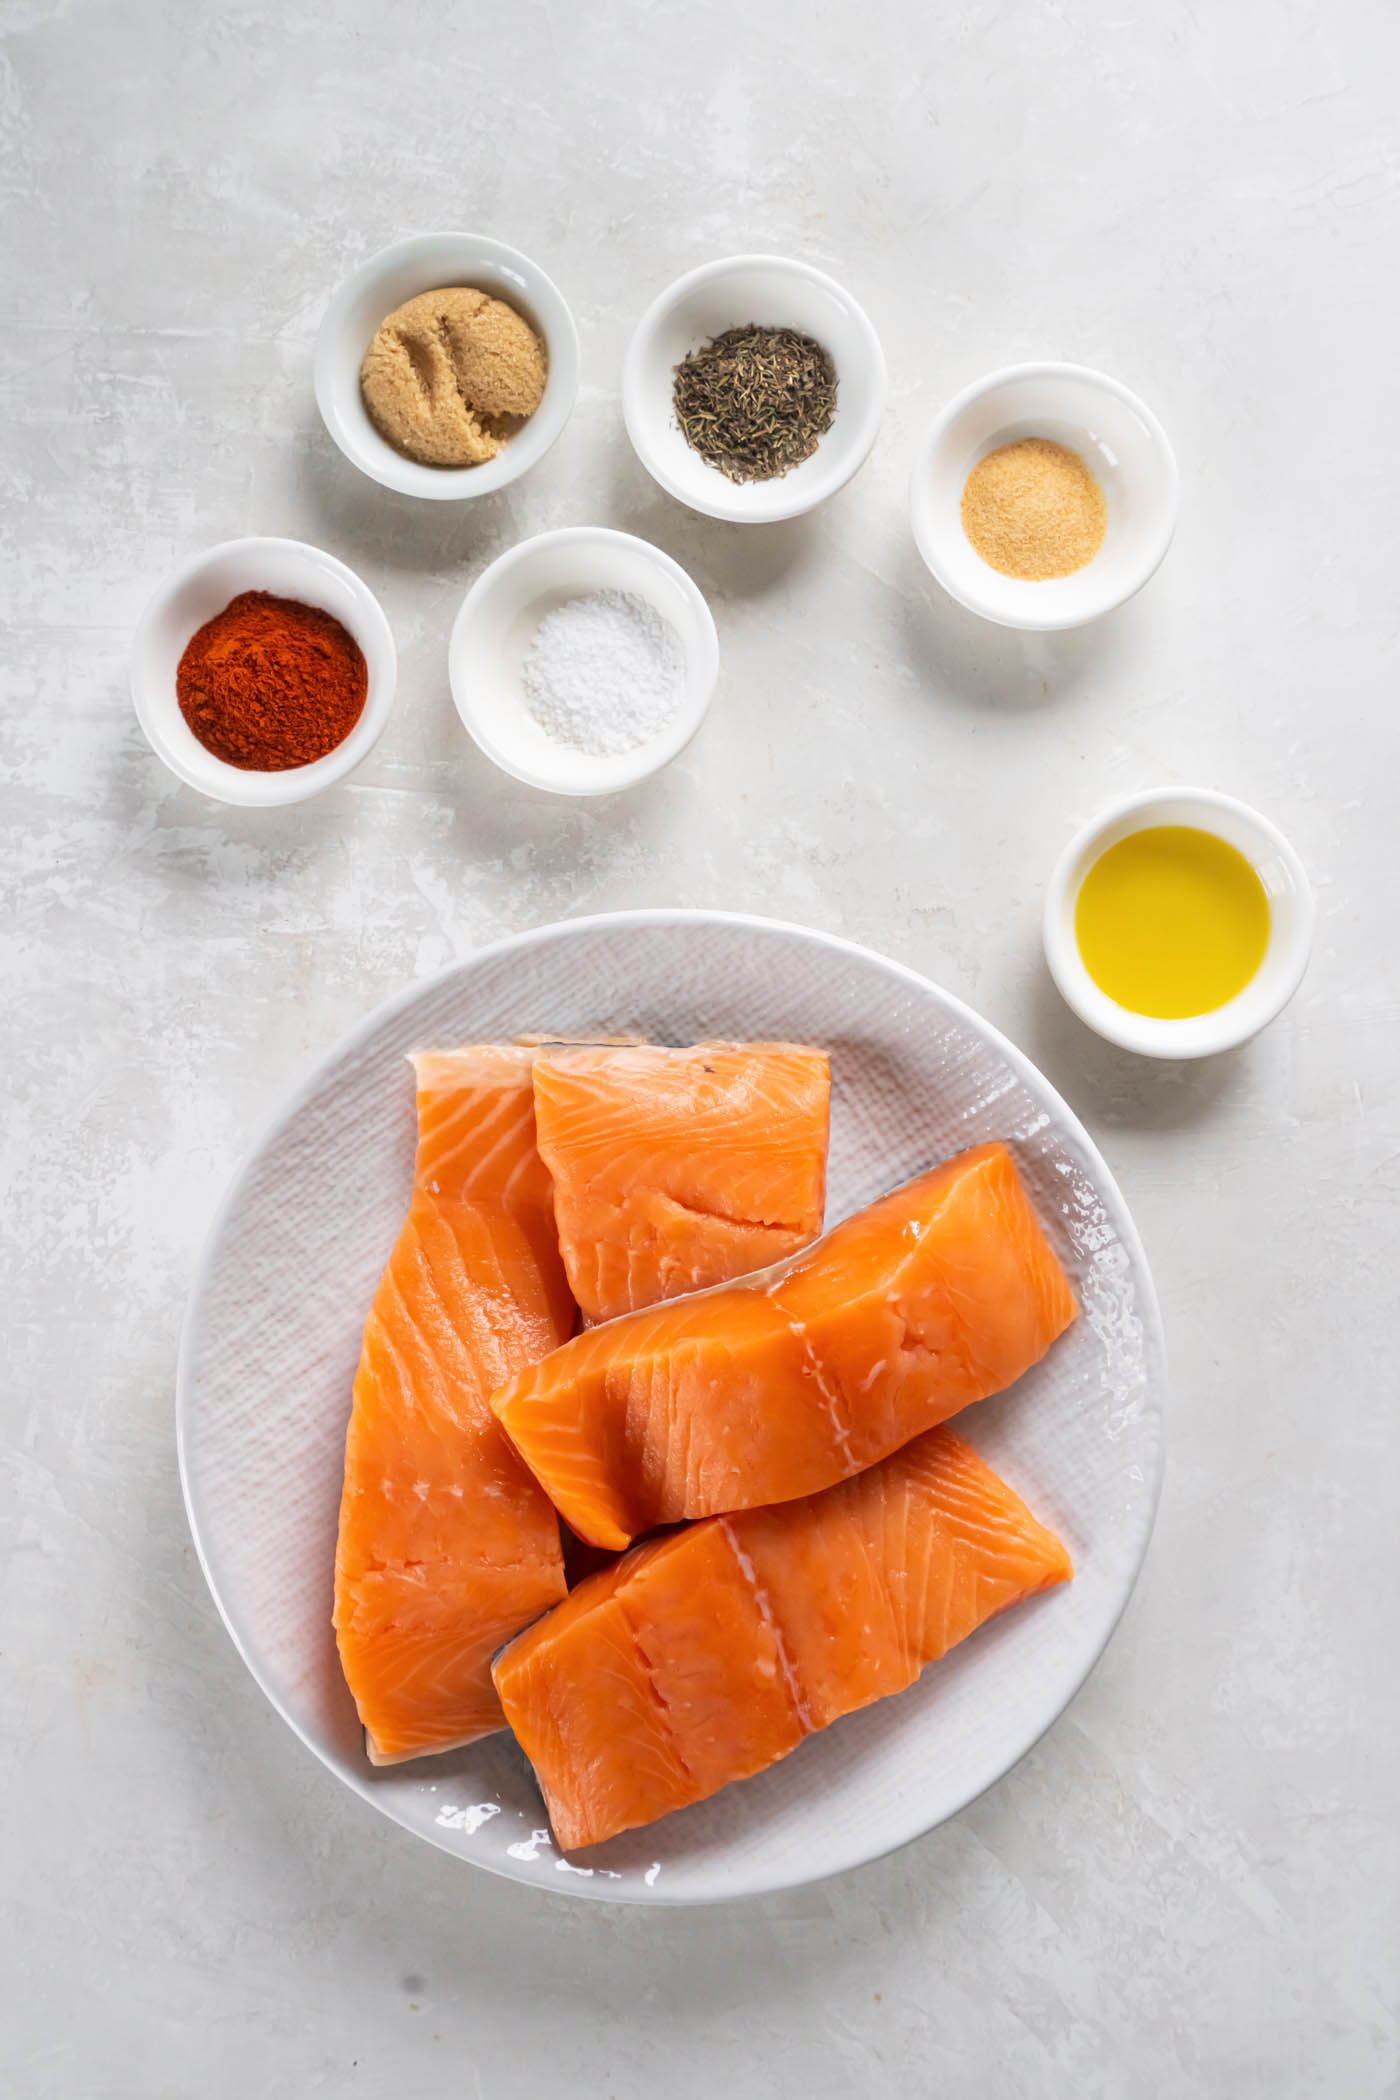 Spices and olive oil in small bowls, and four raw salmon fillets on a plate.